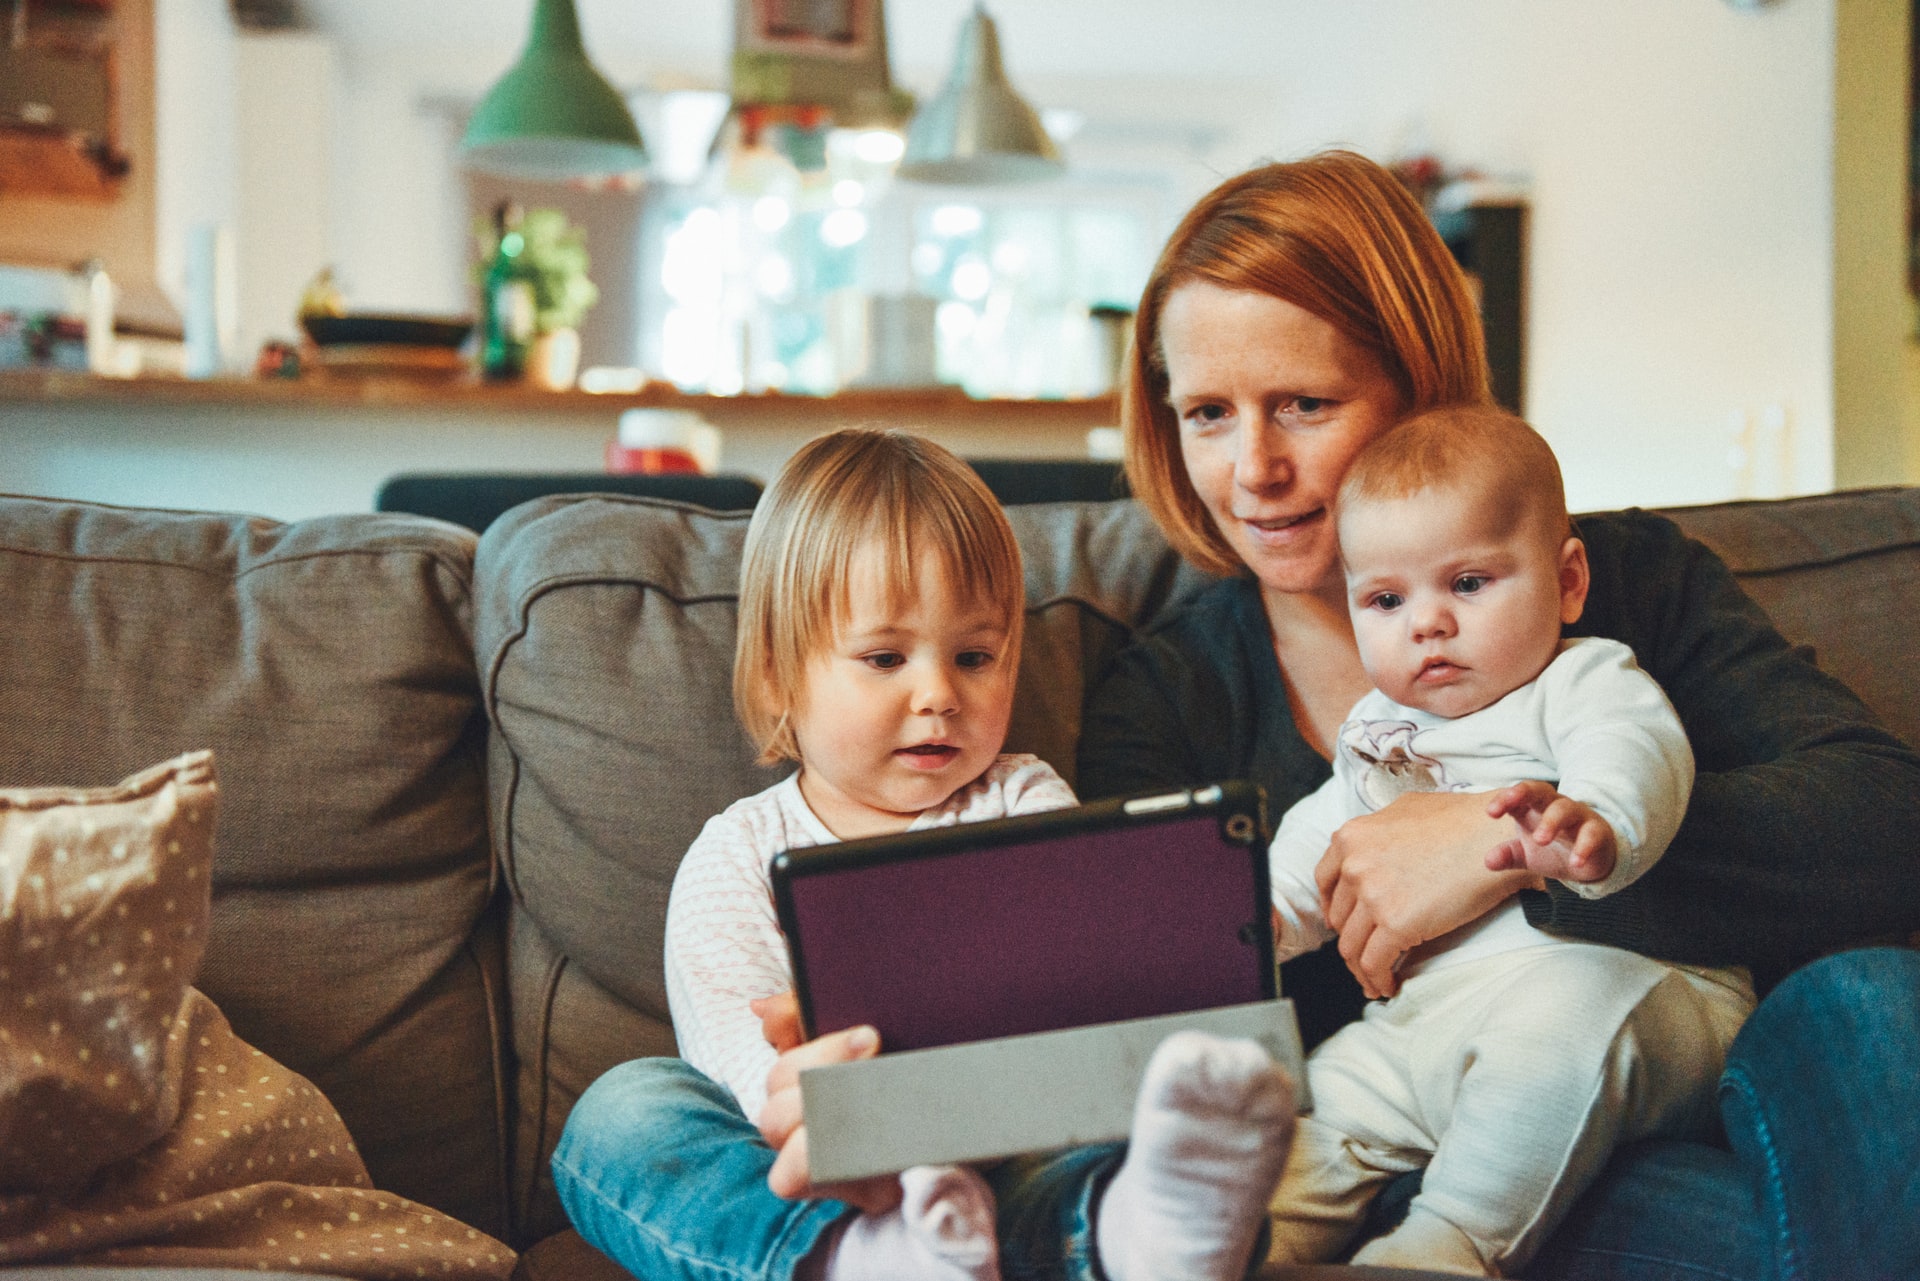 Mom sitting next to toddler and holding baby looking at parenting advice for new parents on computer